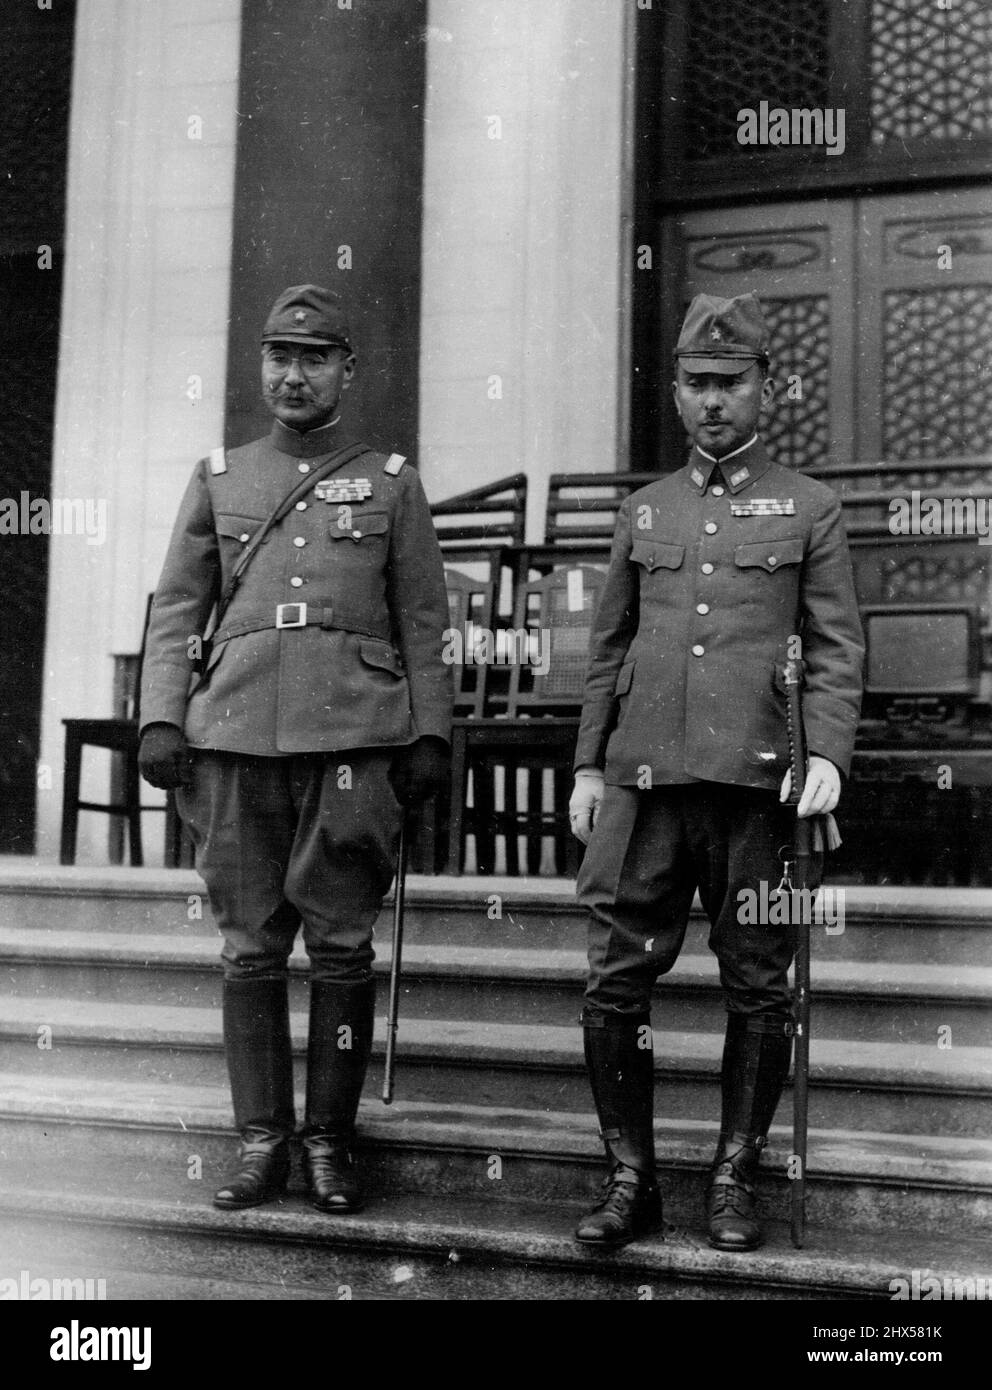 Prince Visits Canton.... Lieutenant-General Prince Yasuhiko Asaka, right, poses with Lieutenant-General Riichi-Ando, commander of the Japanese army in South China during a recent visit in Canton. His Highness returned to Japan yesterday after a three-week tour of war fronts in China. April 14, 1939. (Photo by The Domei News Photos Service). Stock Photo